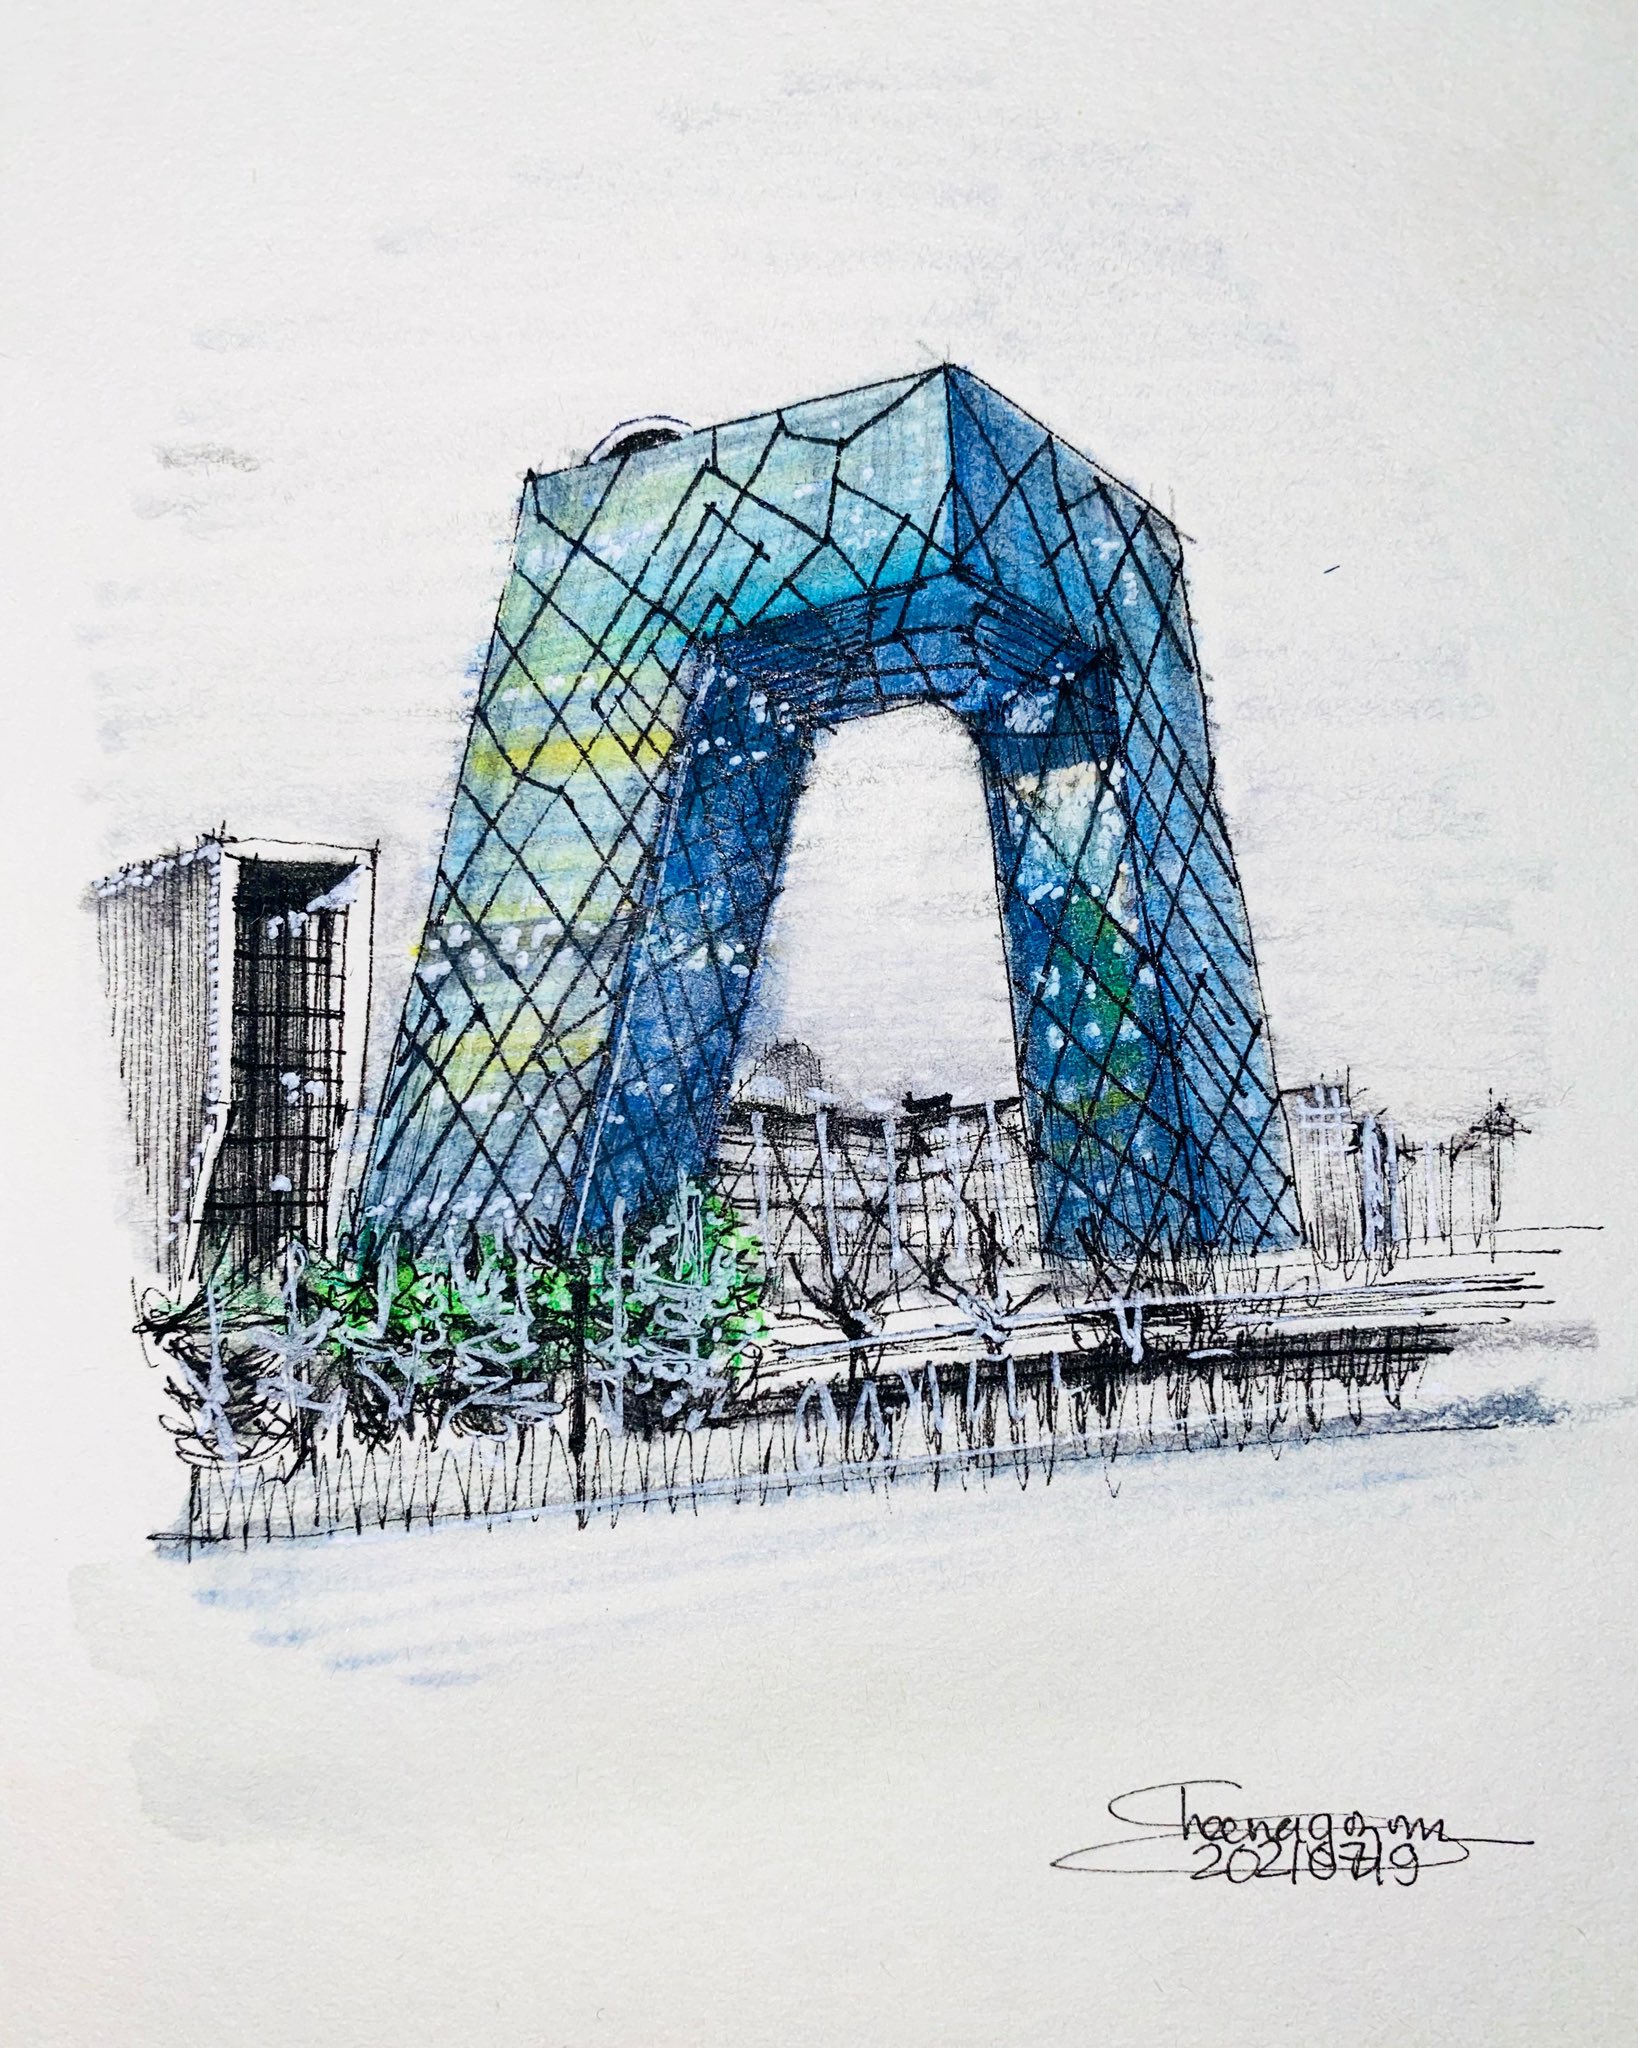 doodle a day architecture on X Doodle 97 is the CCTV Headquarters in  beijing  china  designed by OMA and remkoolhaas    The  accommodation for the China Central Television